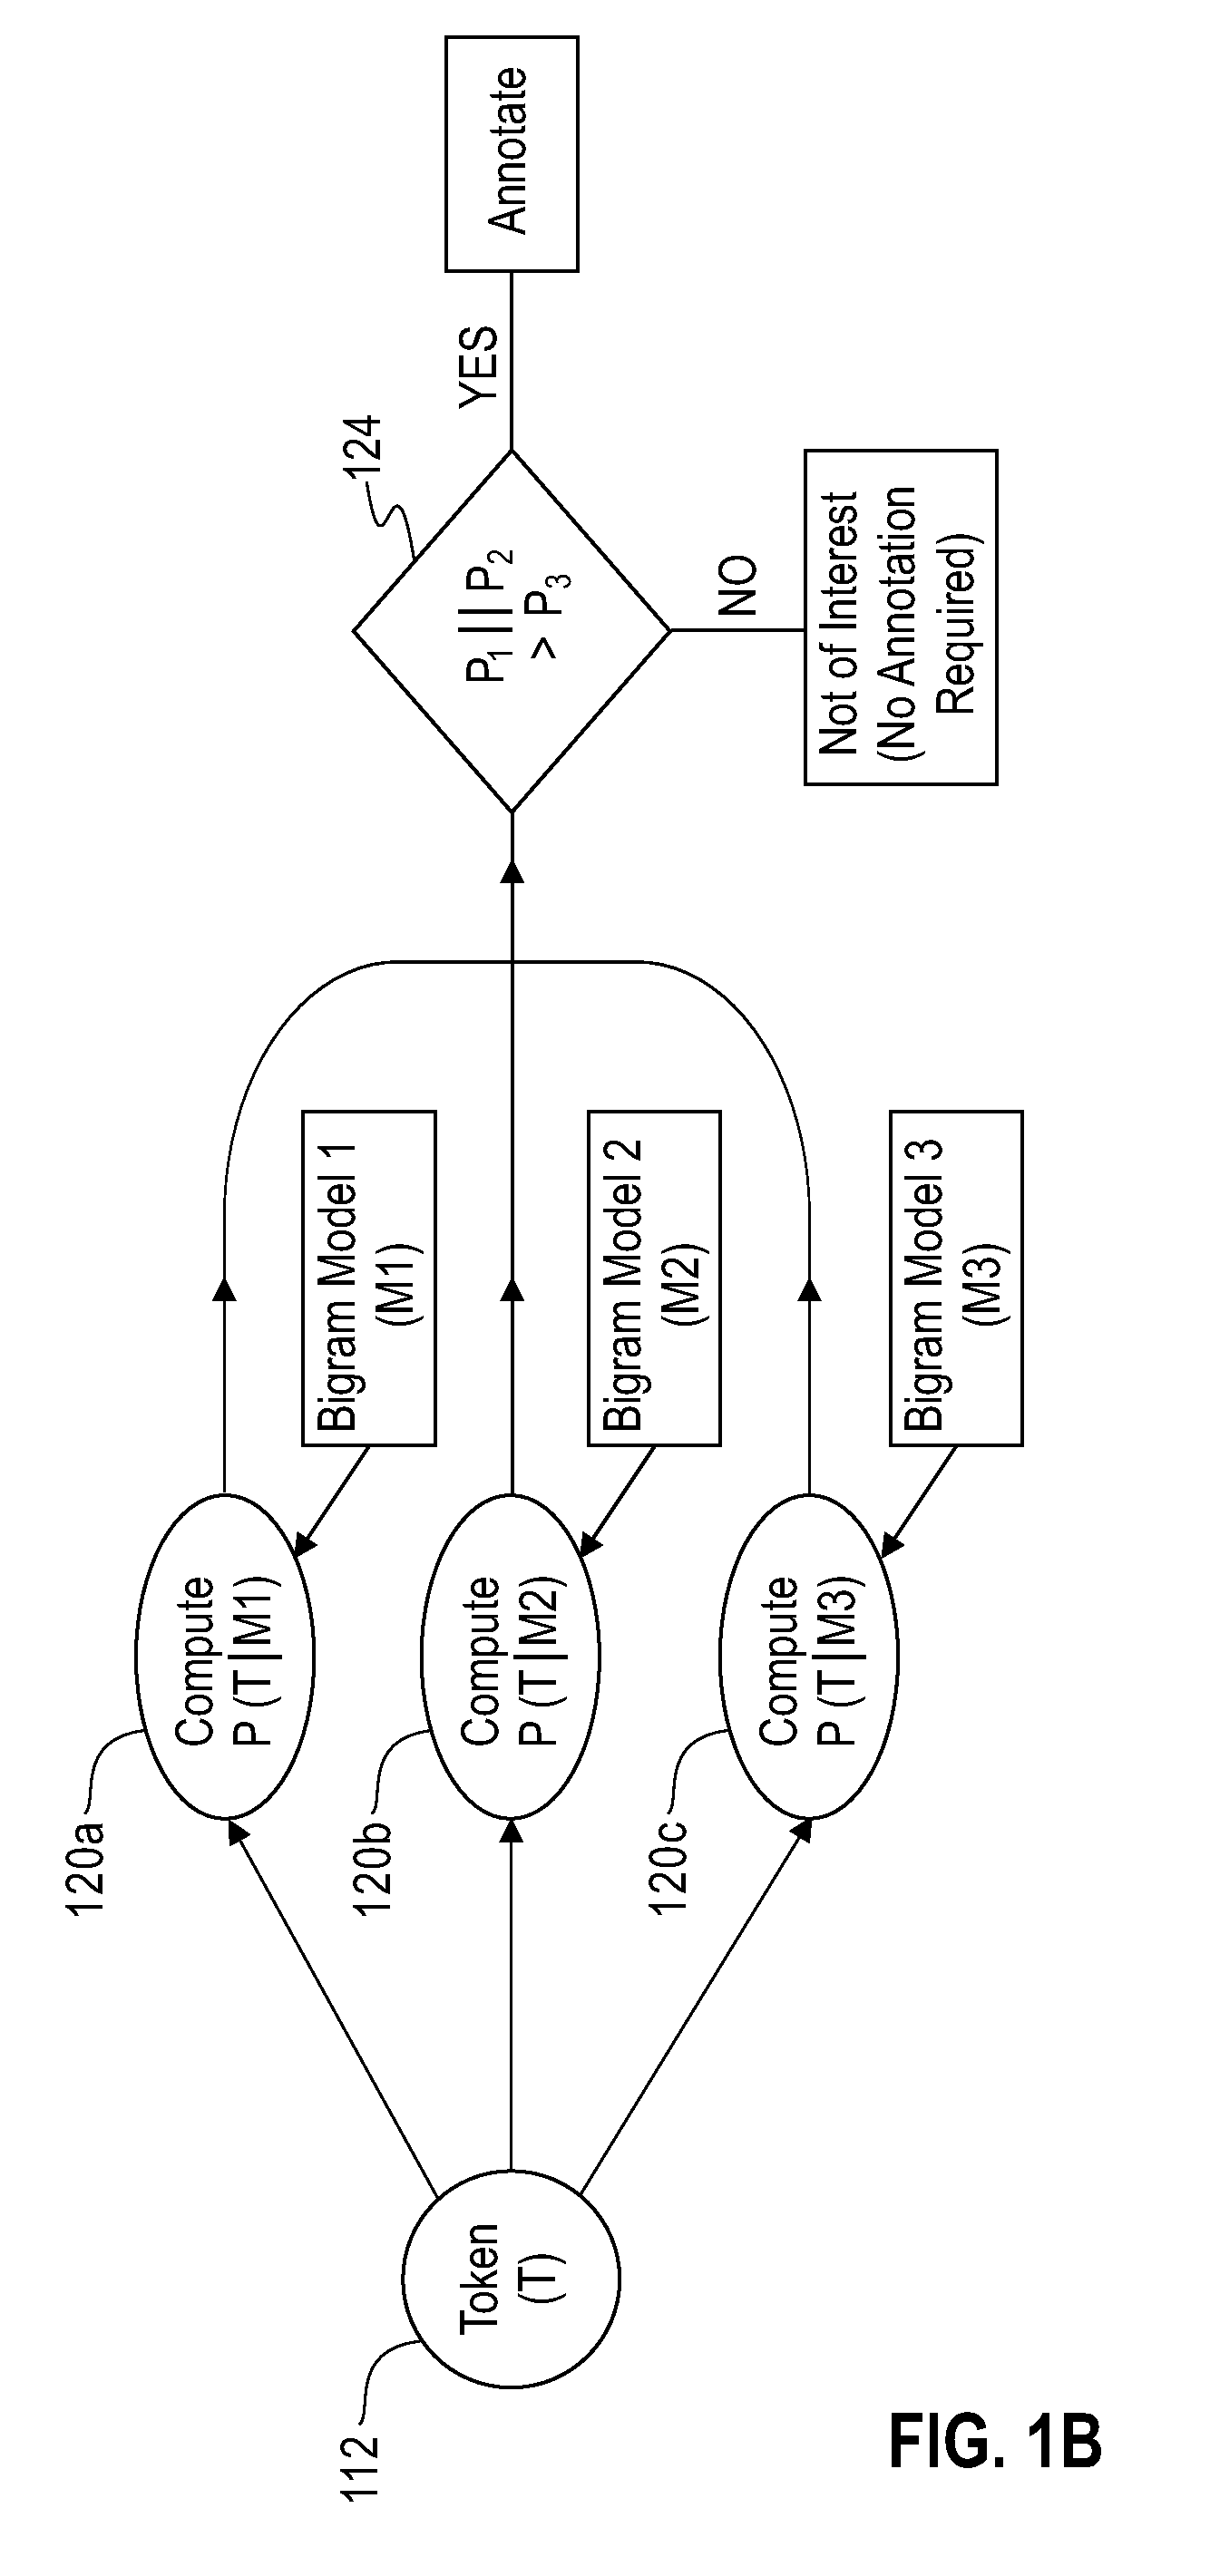 System and Method for Identifying Similar Molecules